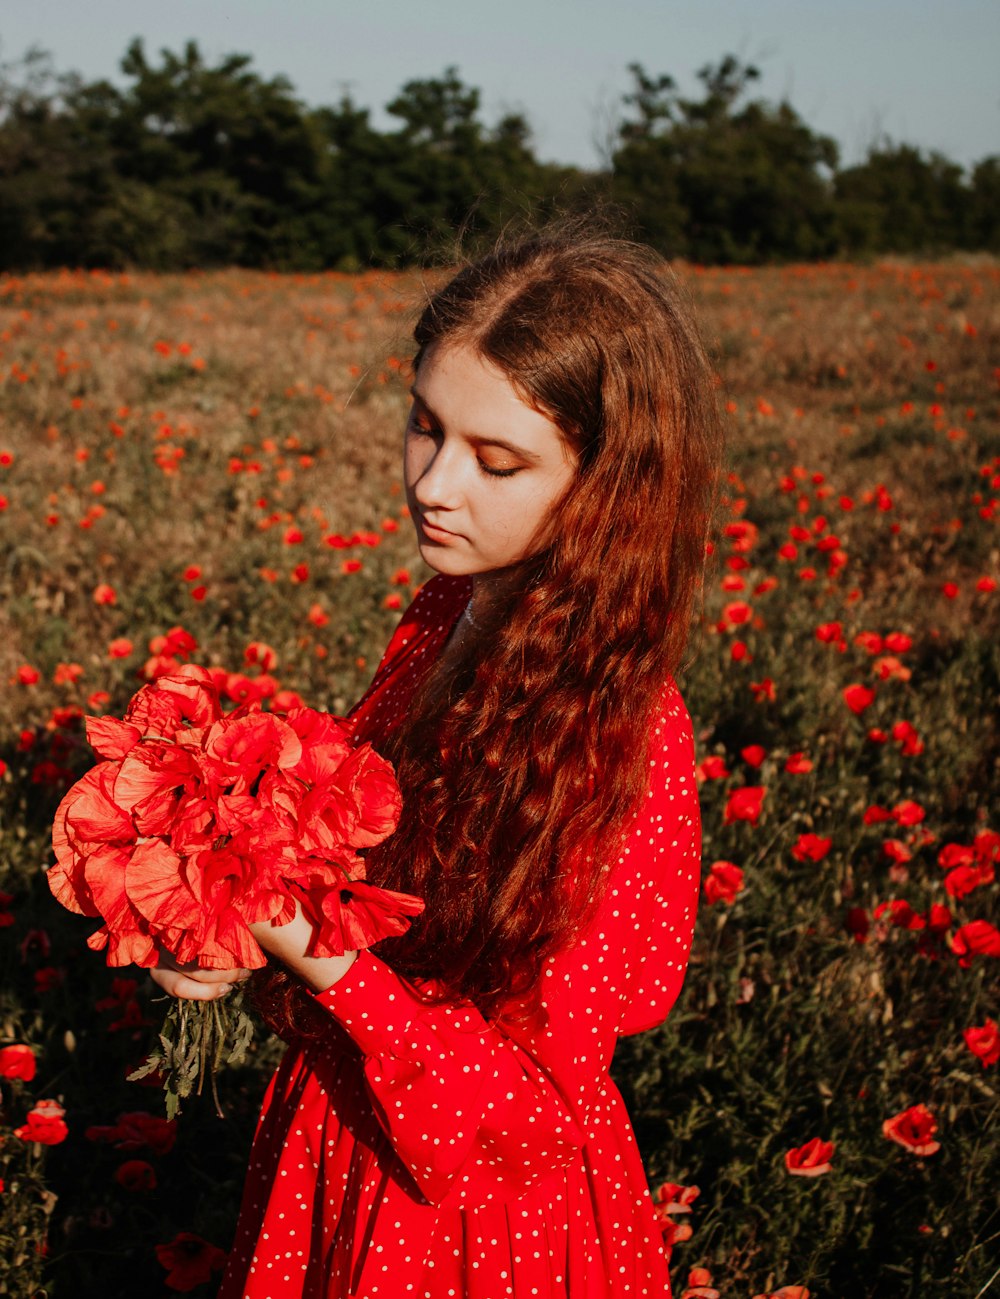 a person in a red dress holding a flower in a field of flowers